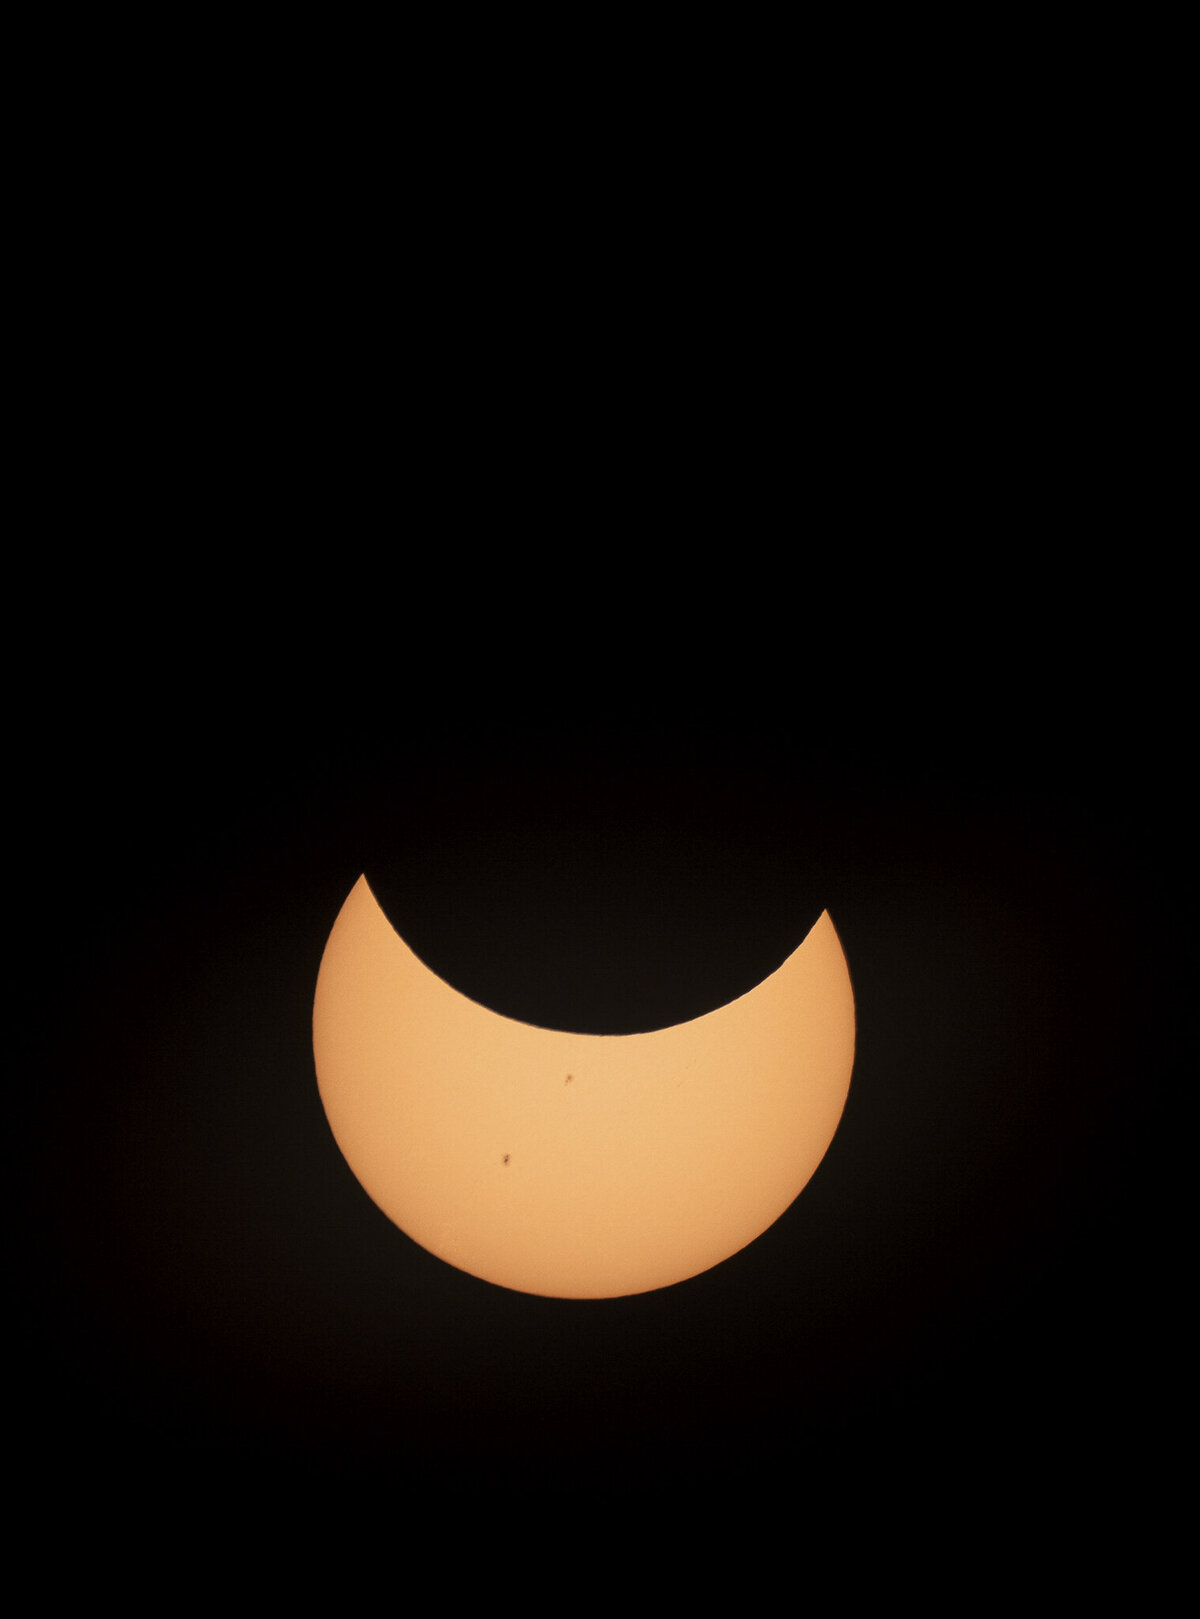 Annular Eclipse Photography New Mexico Astrophotography_By Stephanie Vermillion